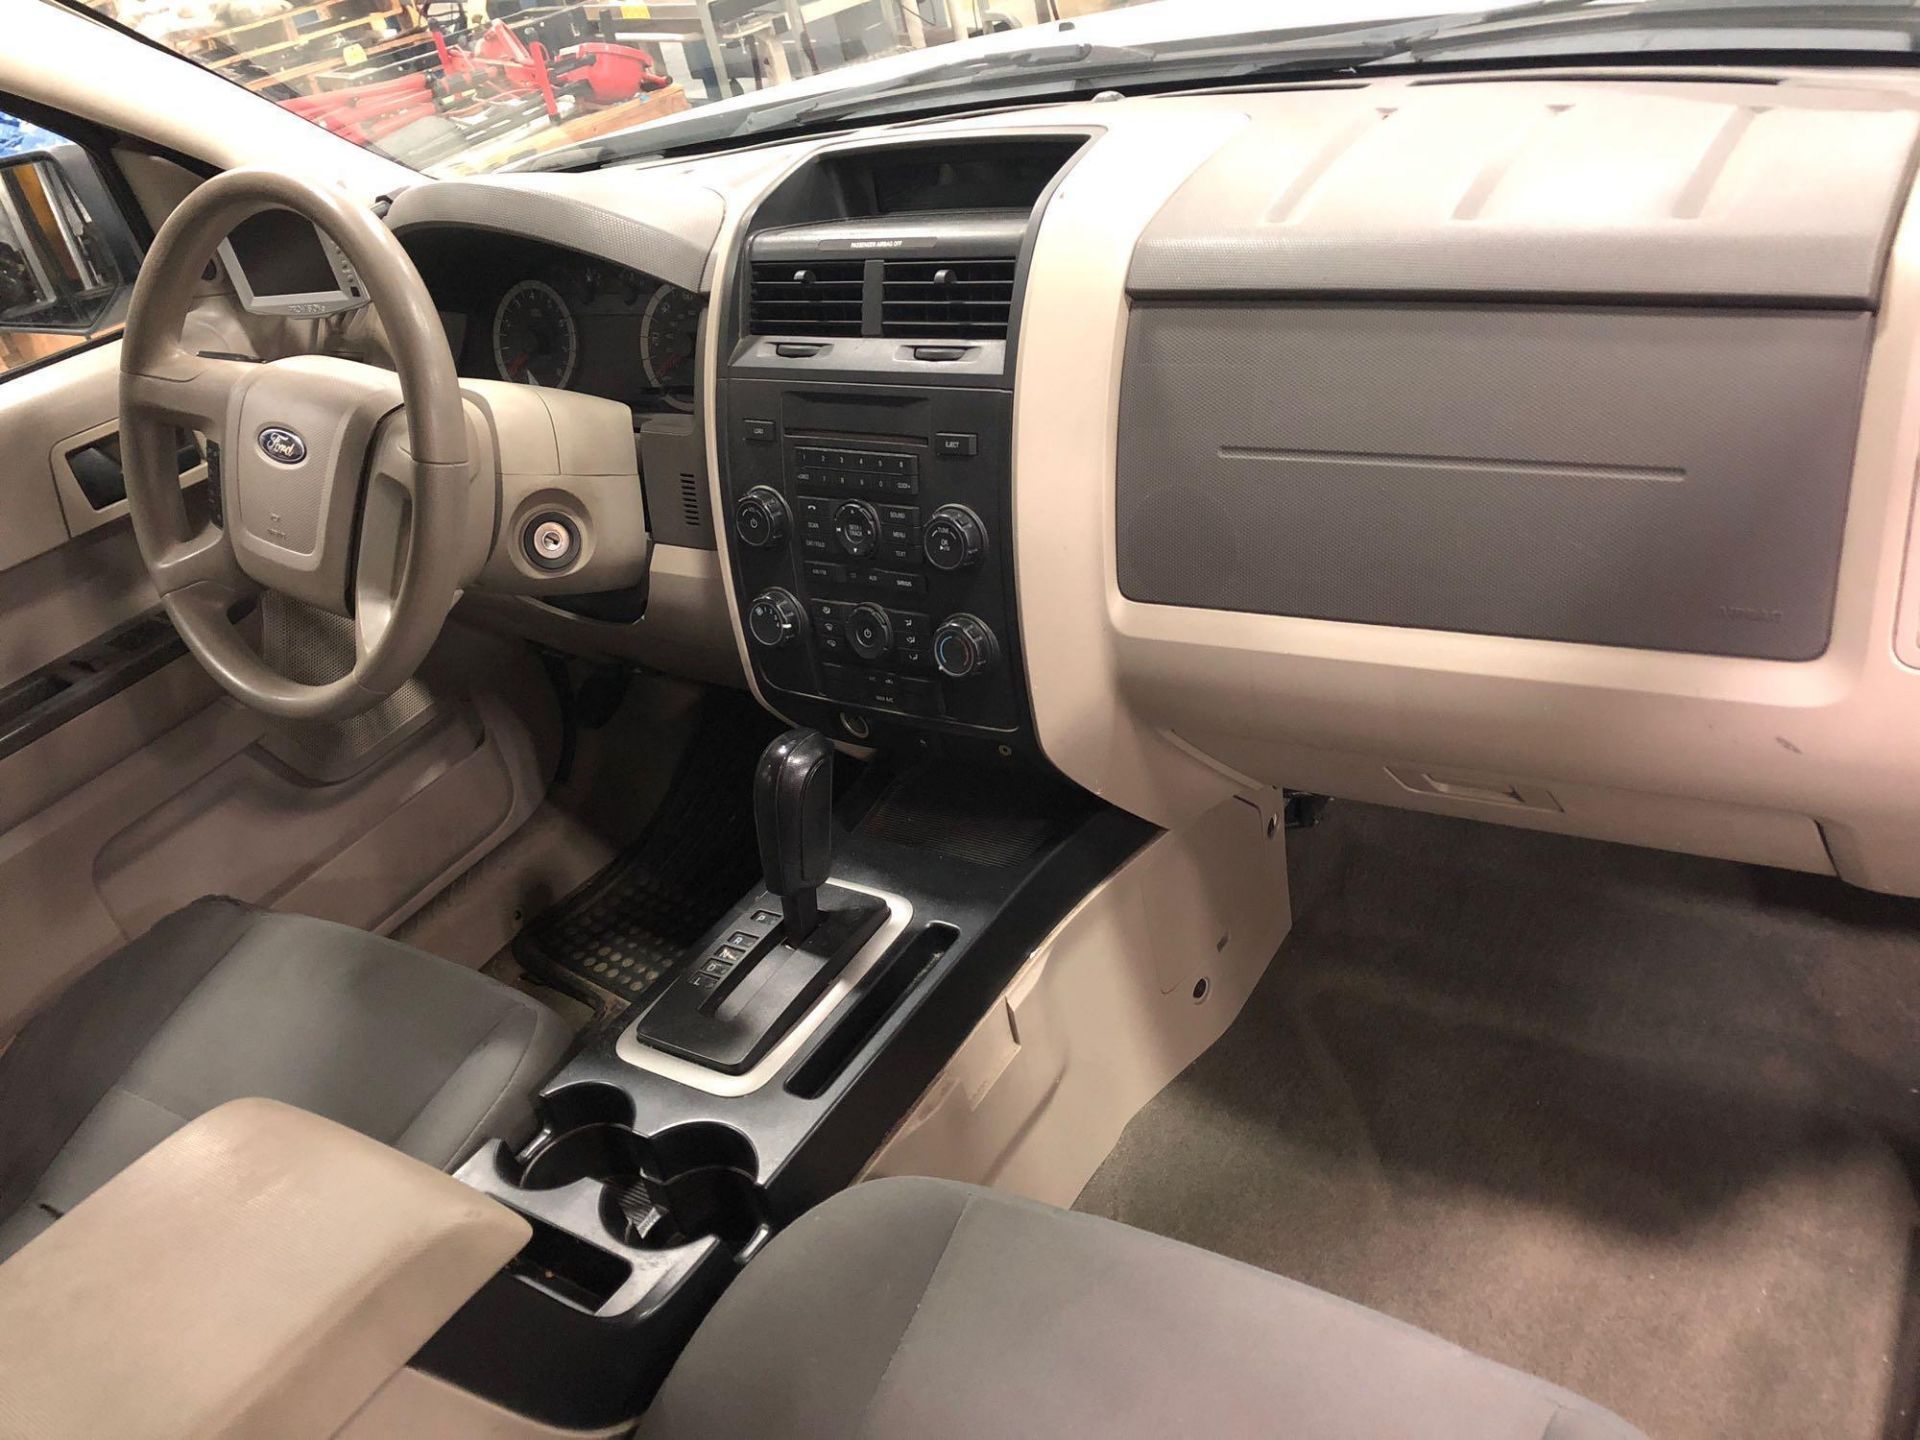 2010 FORD ESCAPE SUV, 4 DOOR, AUTOMATIC TRANSMISSION, RUNS - Image 10 of 17